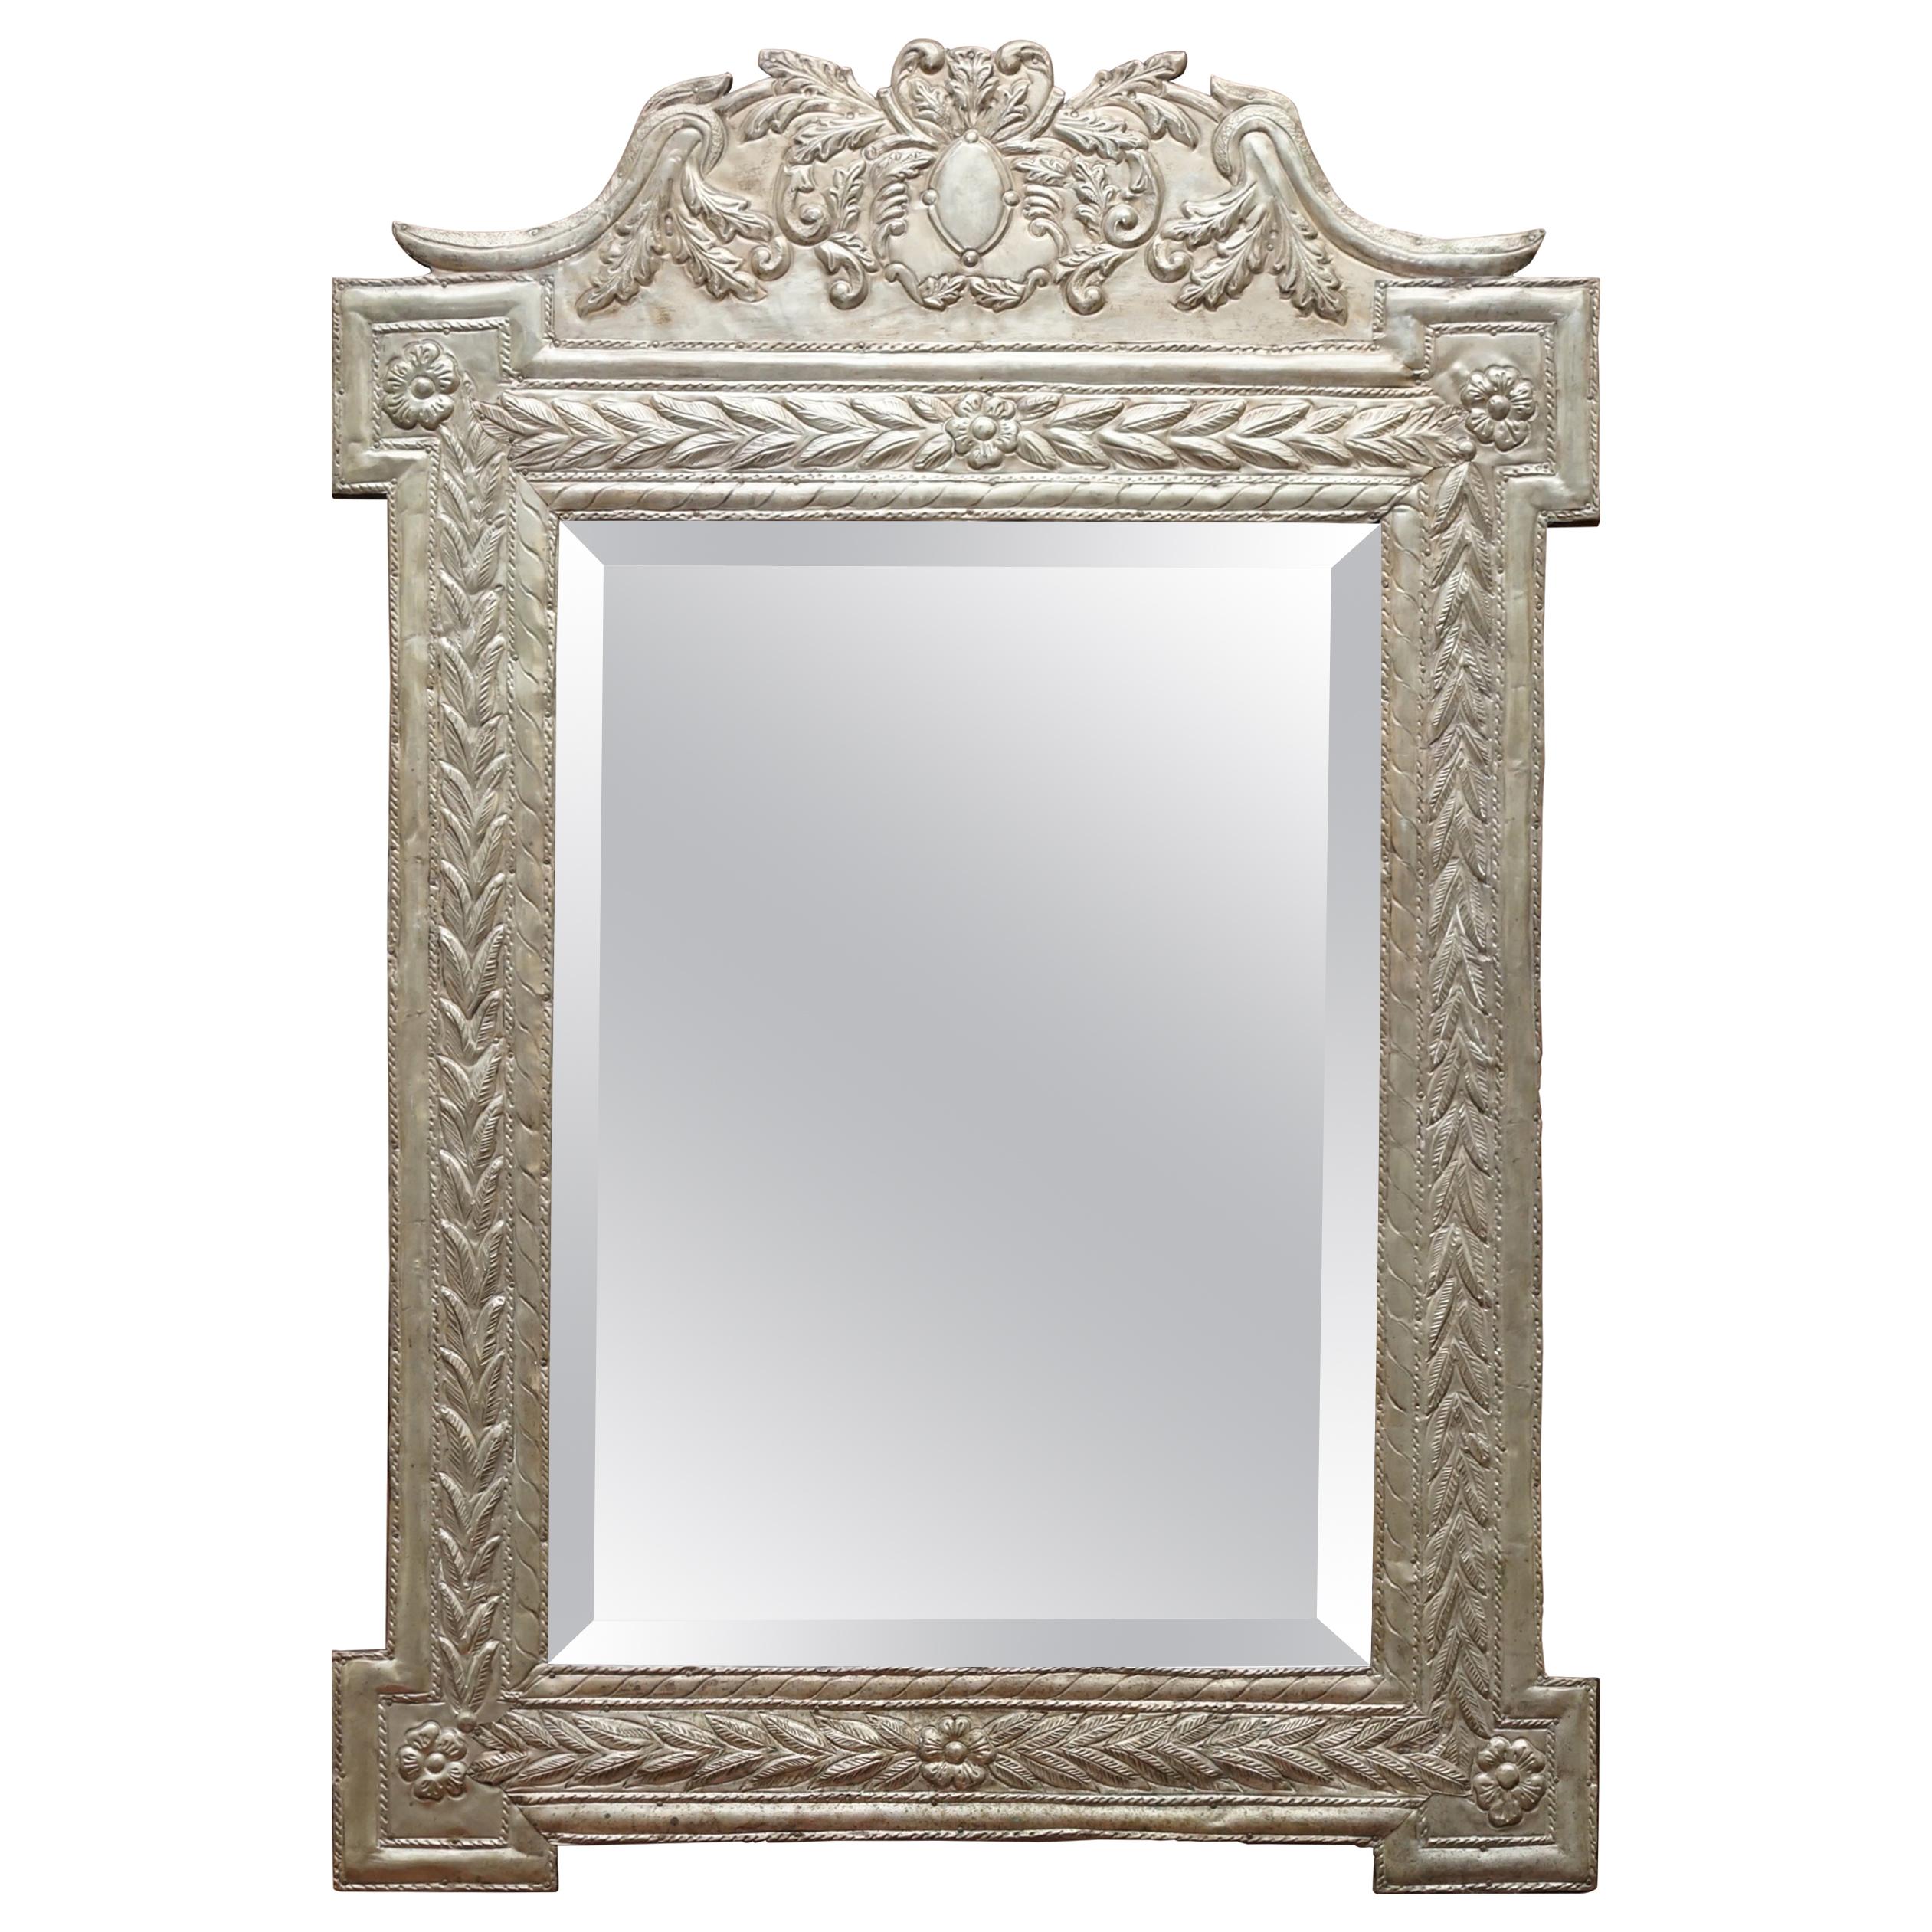 Stunning Indian Silver Repouse Wall Mirror with Ornately Cast and Detailed Frame